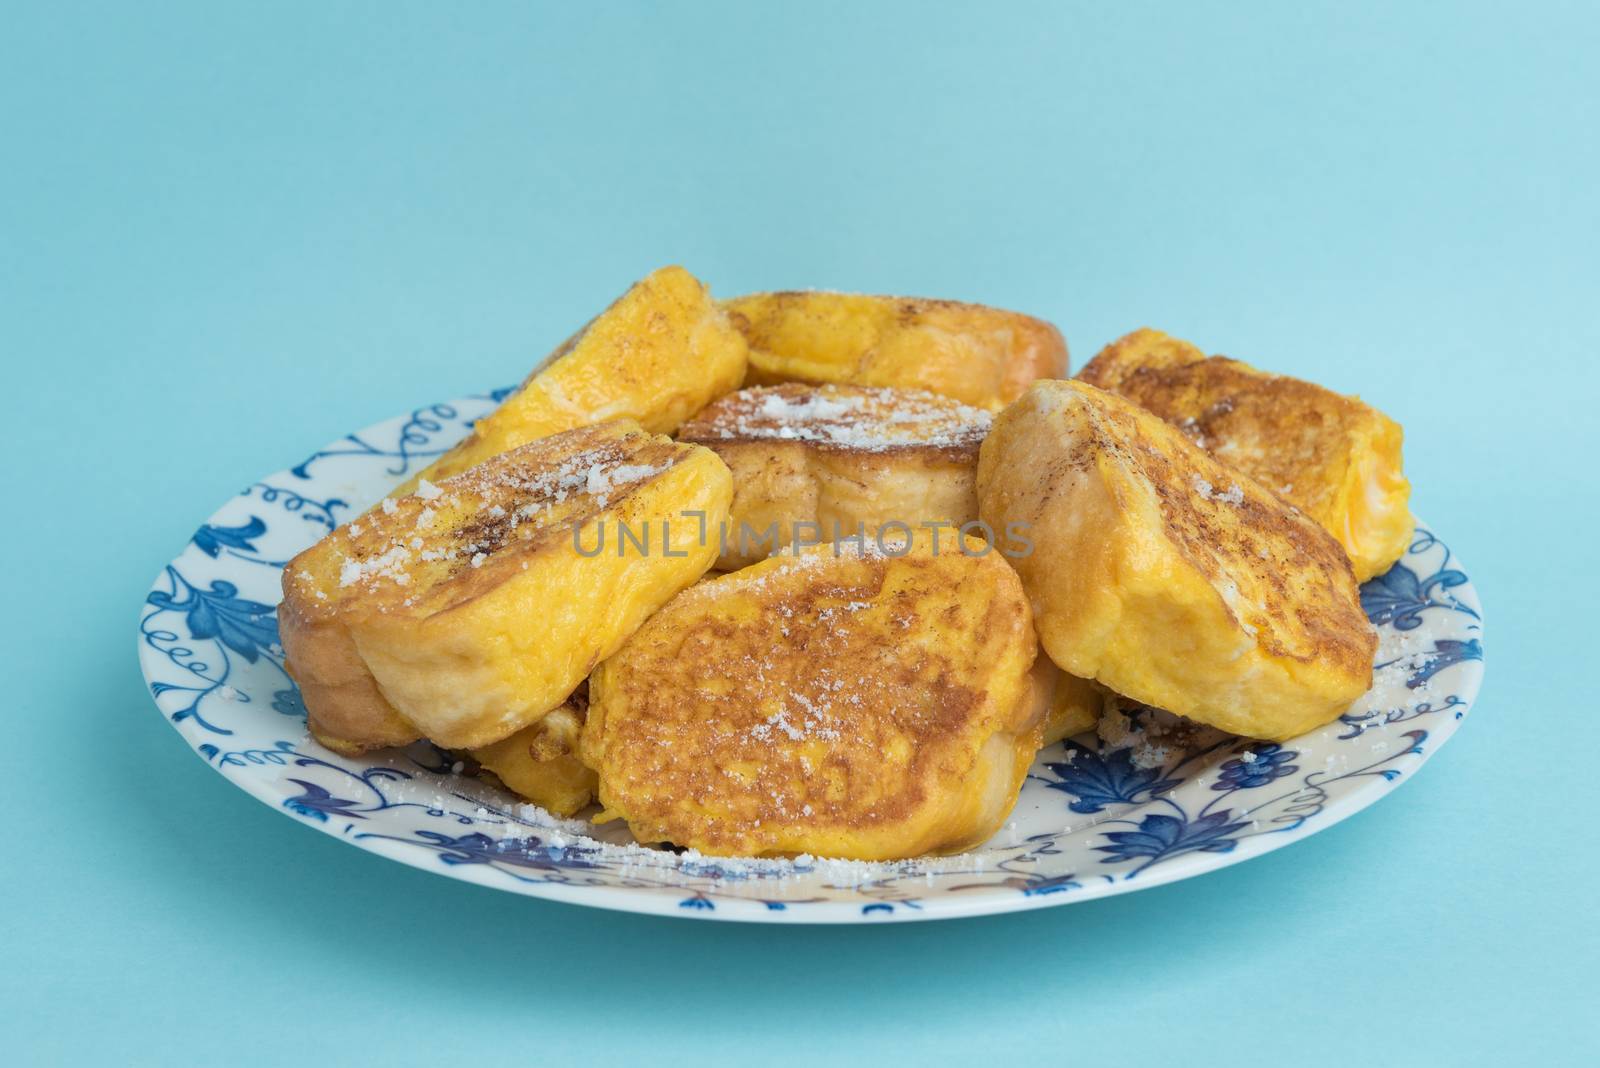 A plate of French toast on a white and blue floral designed plate on a light blue background.